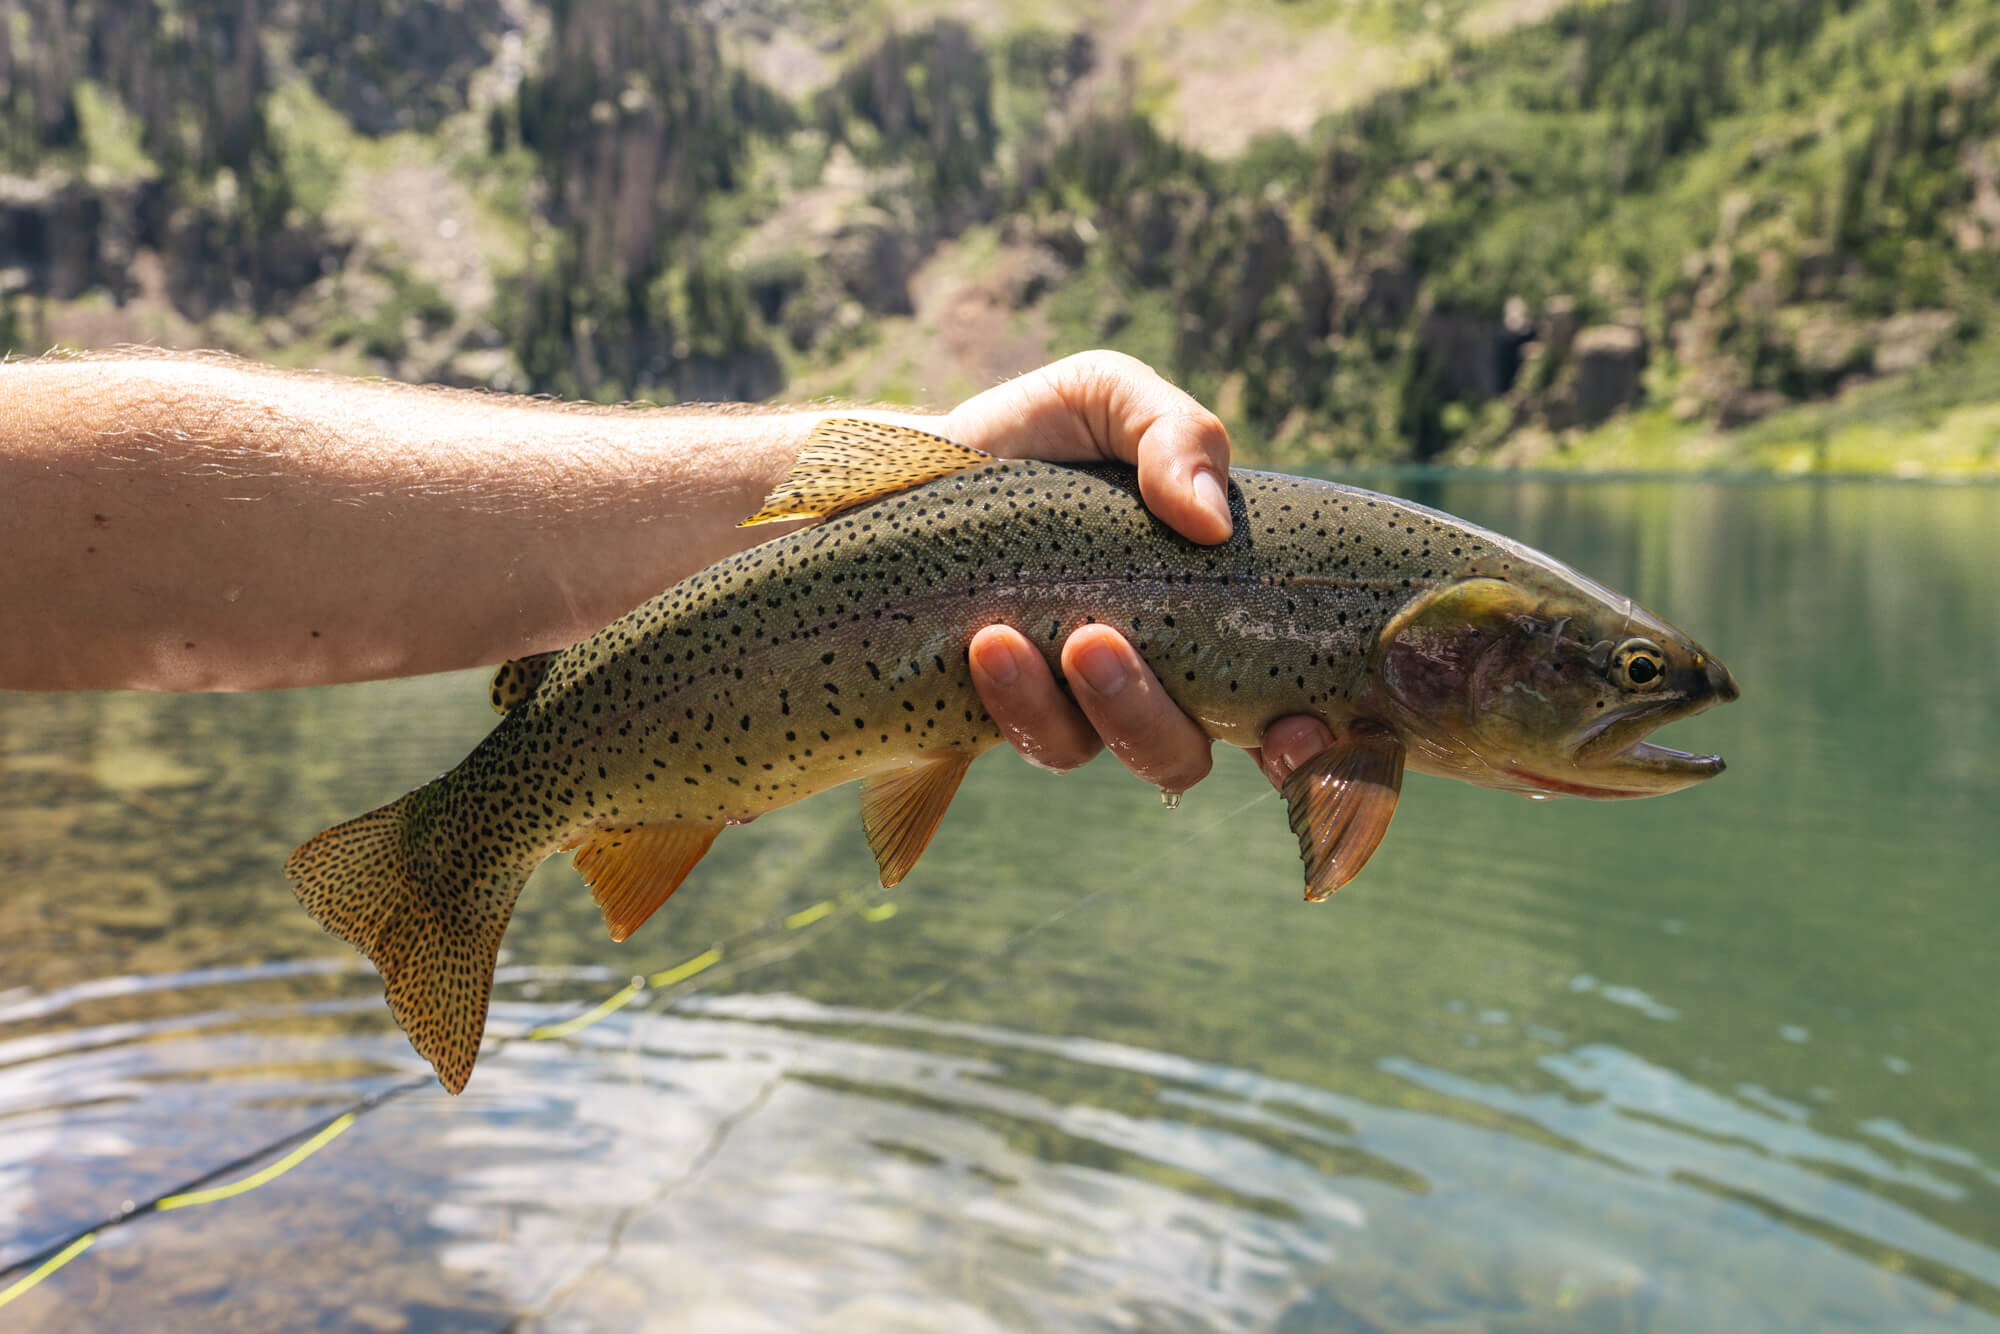 Rio Grande Cutthroat trout from a lake in the South San Juan Wilderness